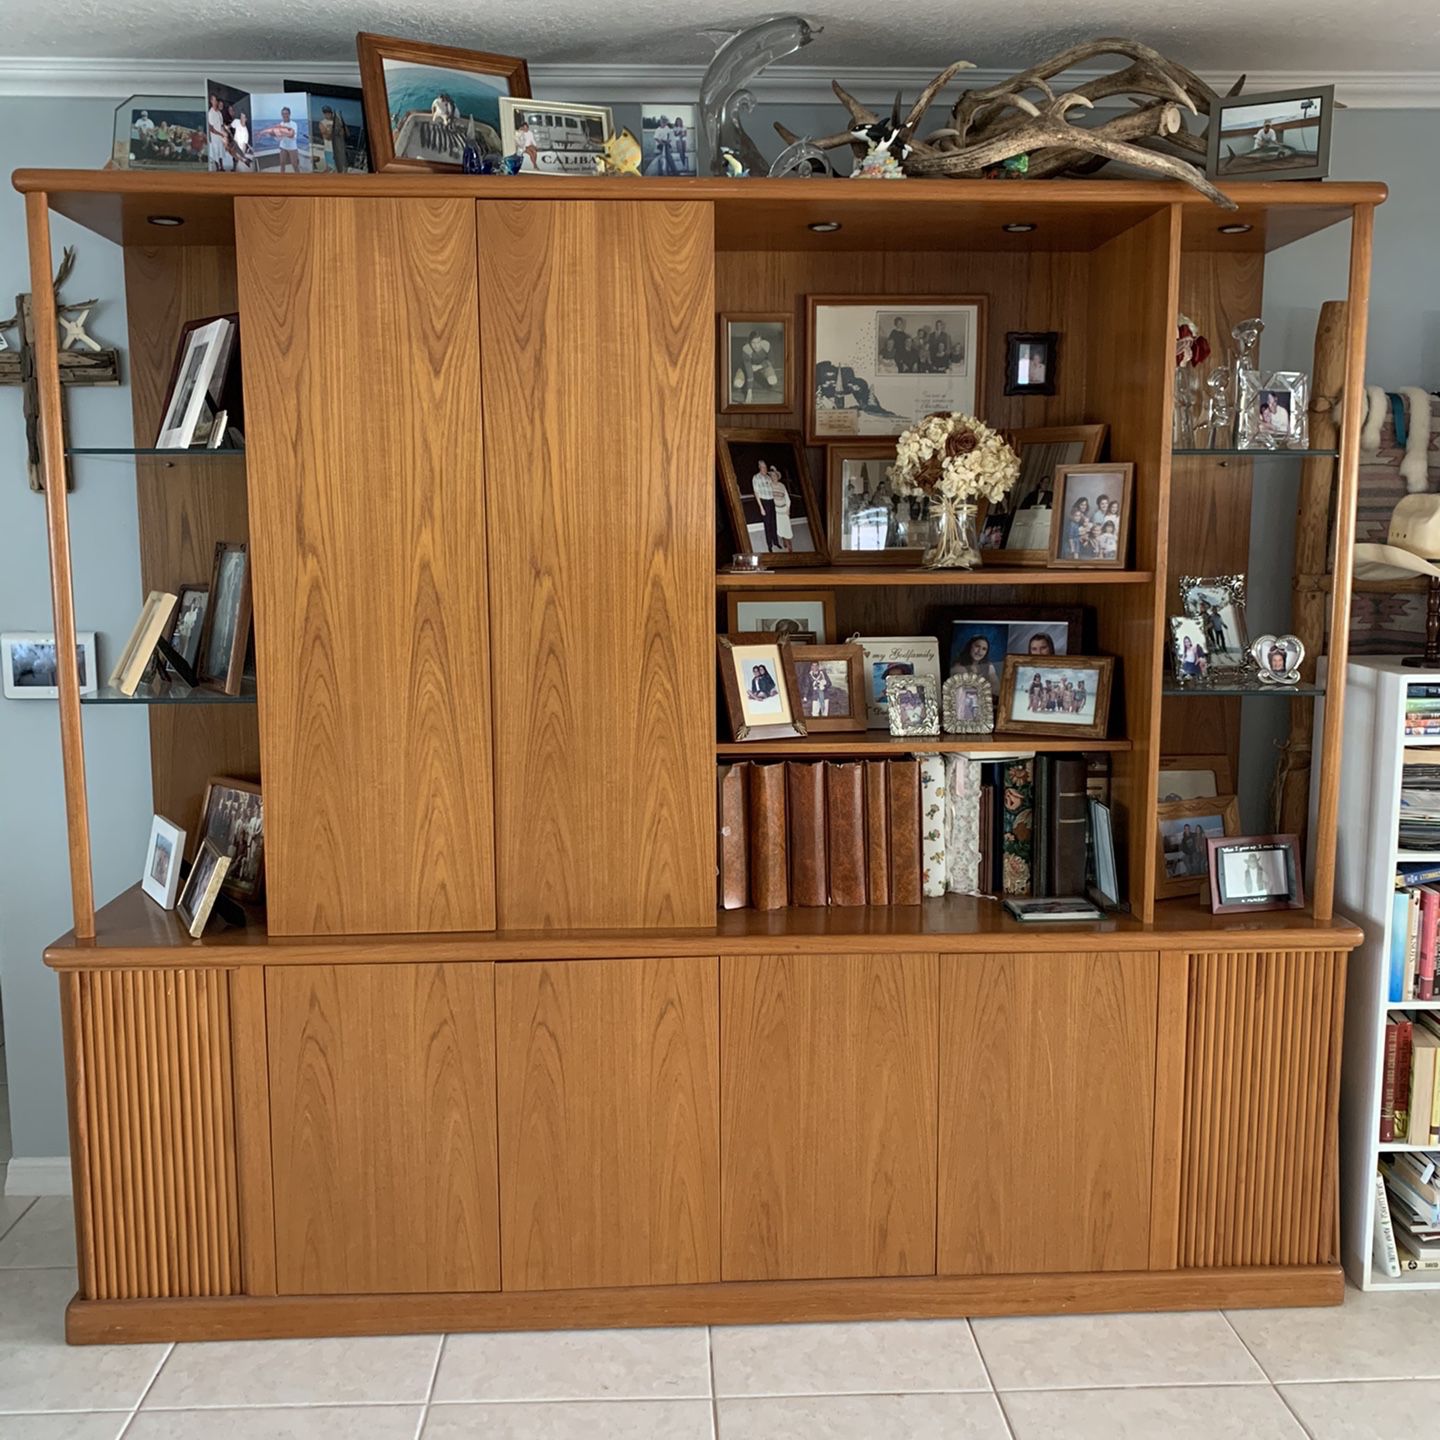 Solid Teak Custom Wall Unit With Built In Stereo System And Shelves